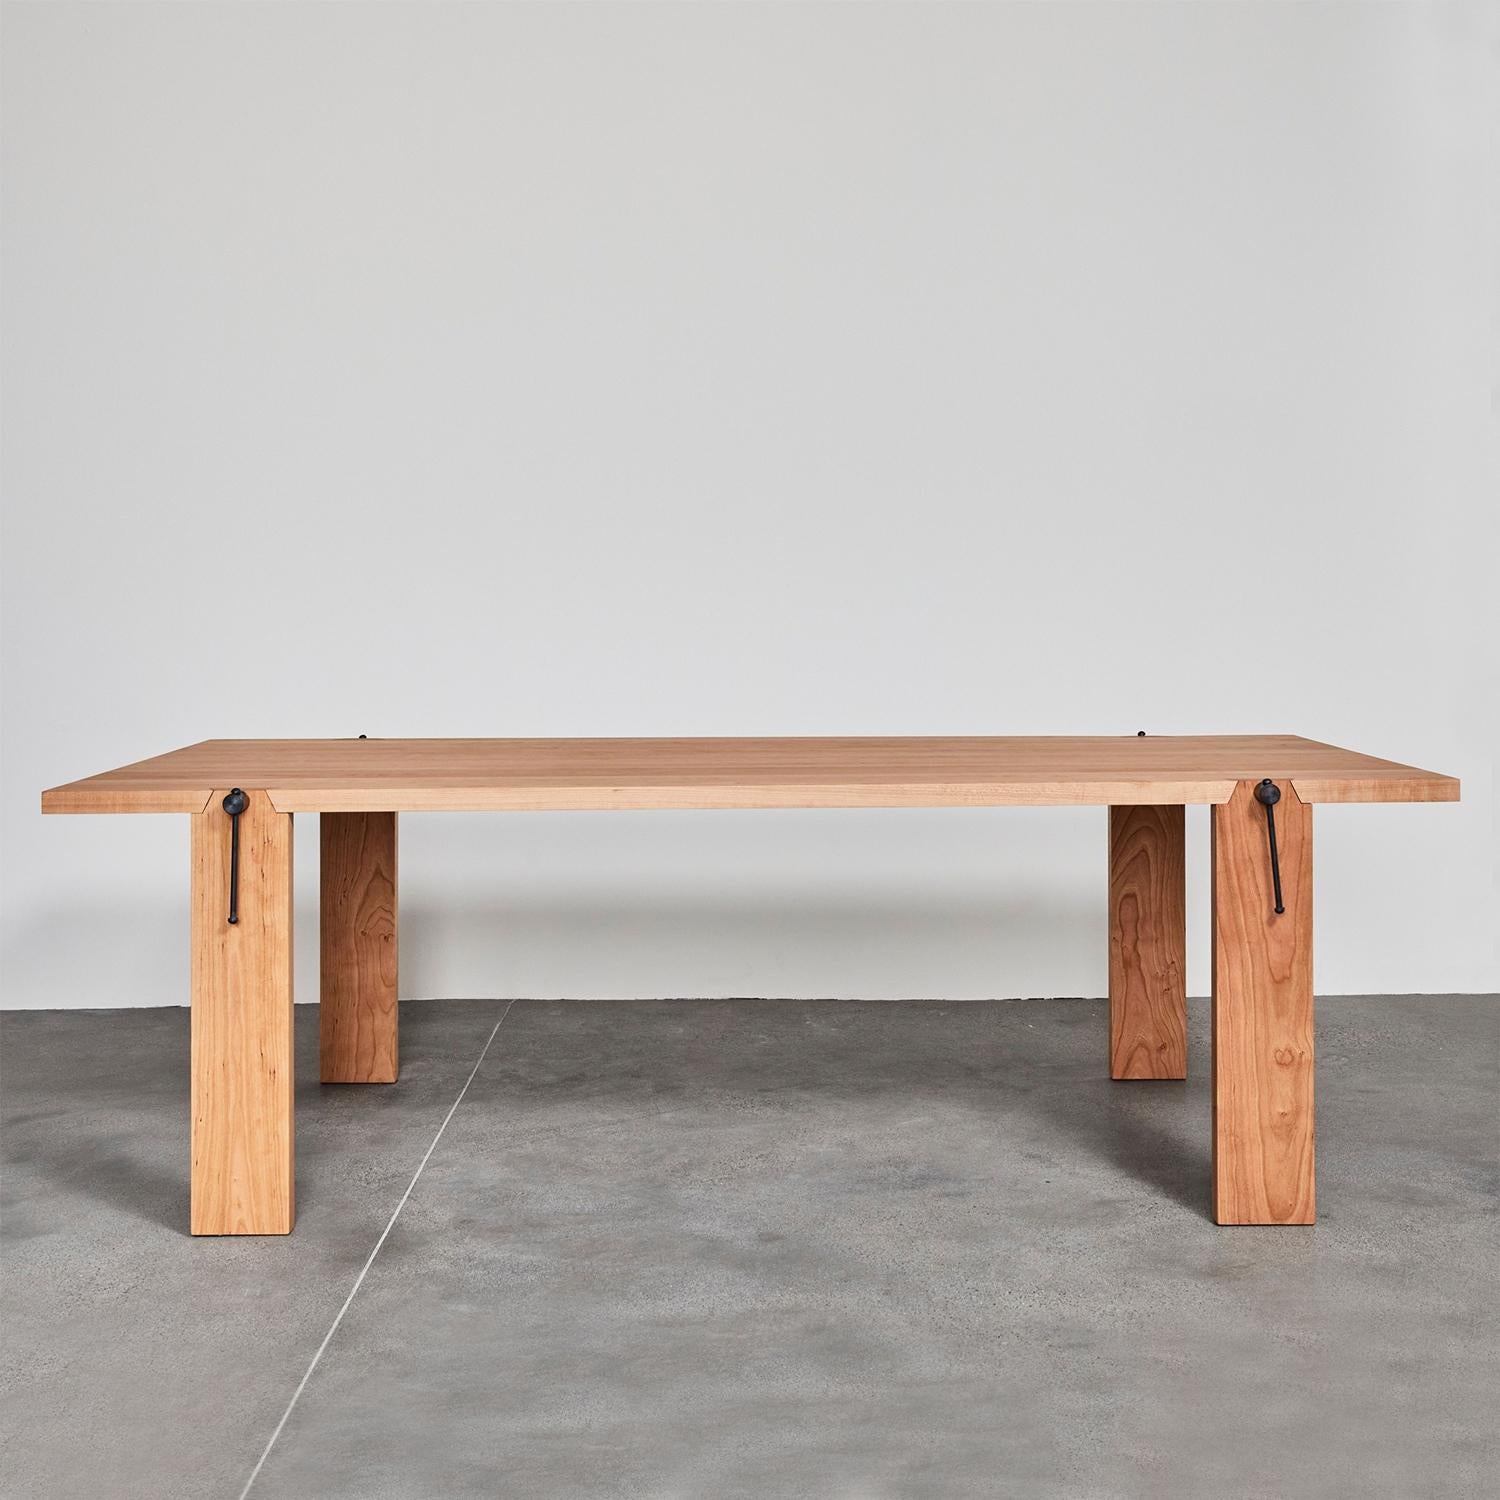 Dining Table Carpenter Oak with all structure in solid
oak wood, with glued lists top. 
Also available on request, in:
L200xD100xH75cm, price: 10500,00€
L220xD100xH75cm, price: 10900,00€
L240xD100xH75cm, price: 11500,00€
L260xD100xH75cm,